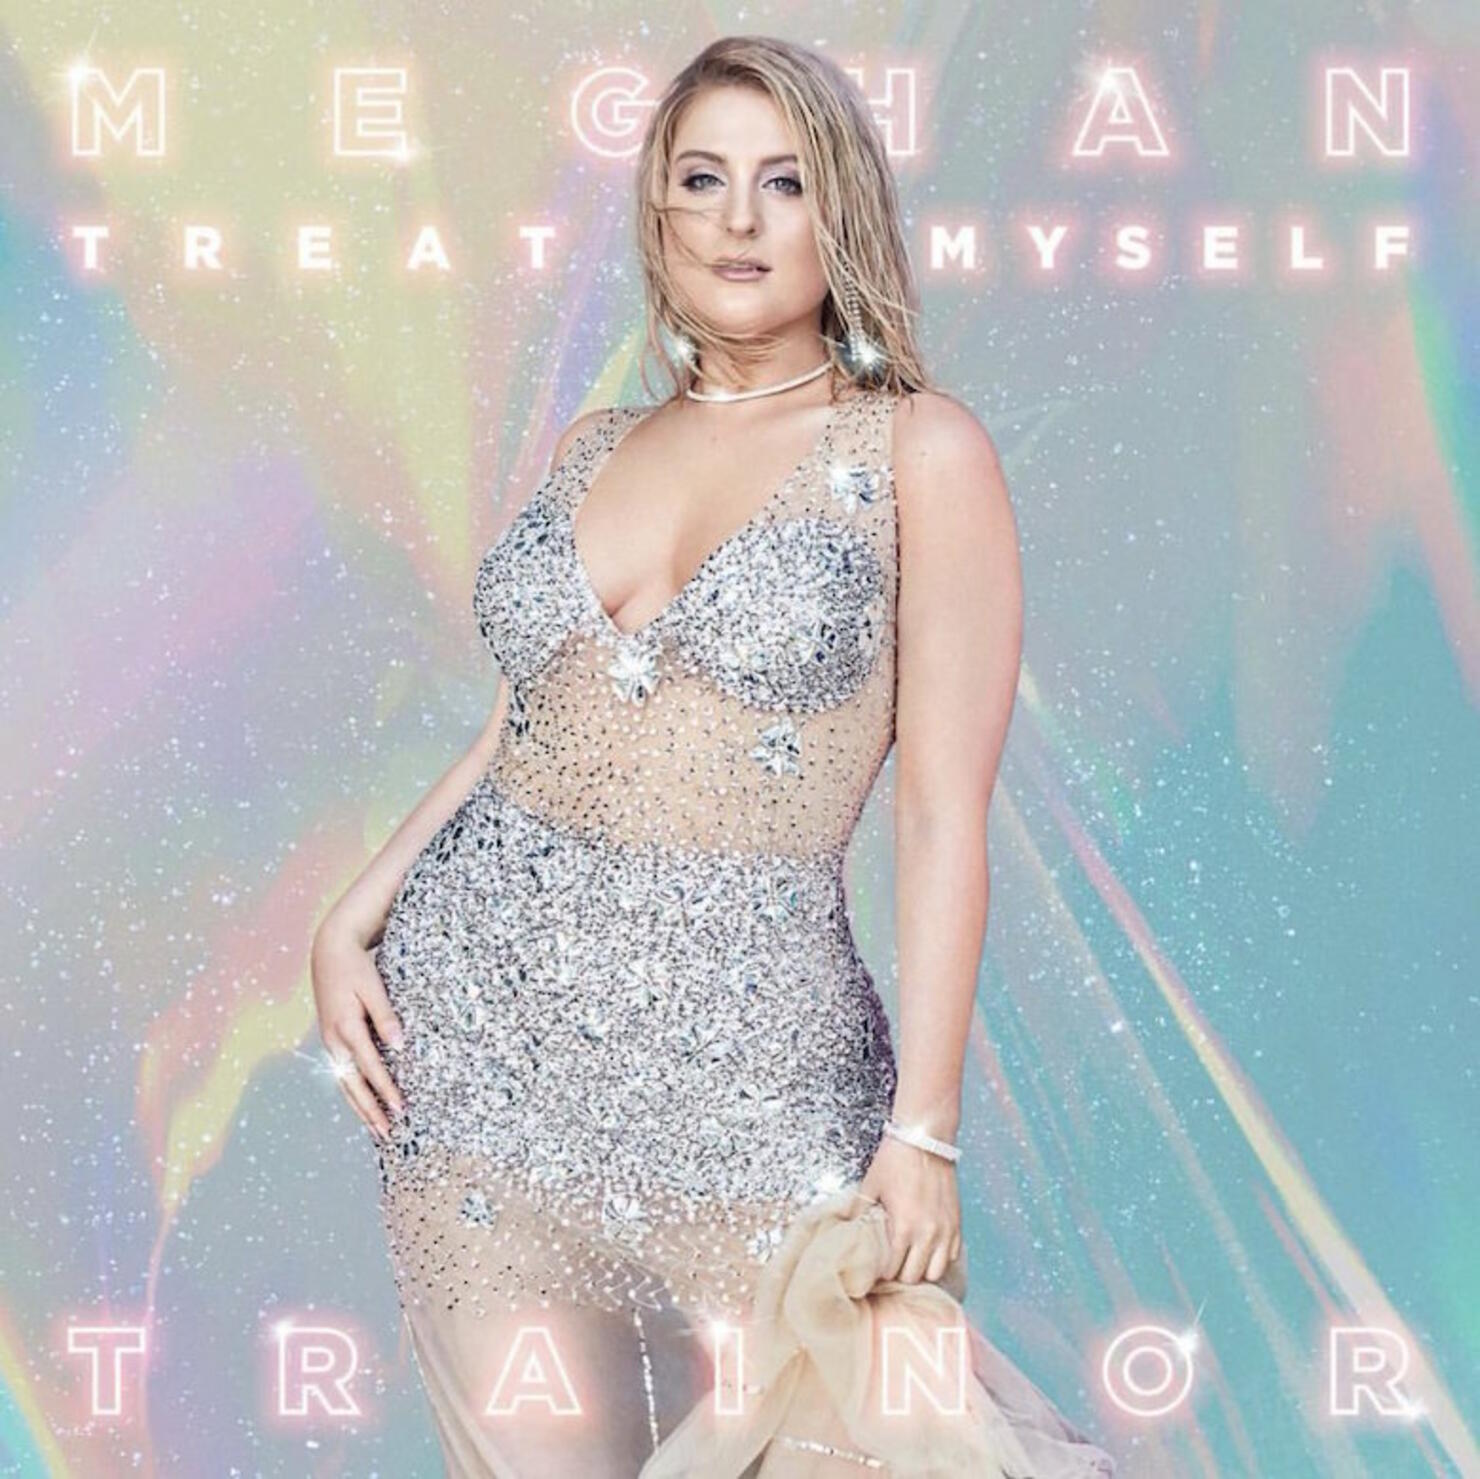 Meghan Trainor Reveals Very Sparkly Album Cover Album Title And Release 